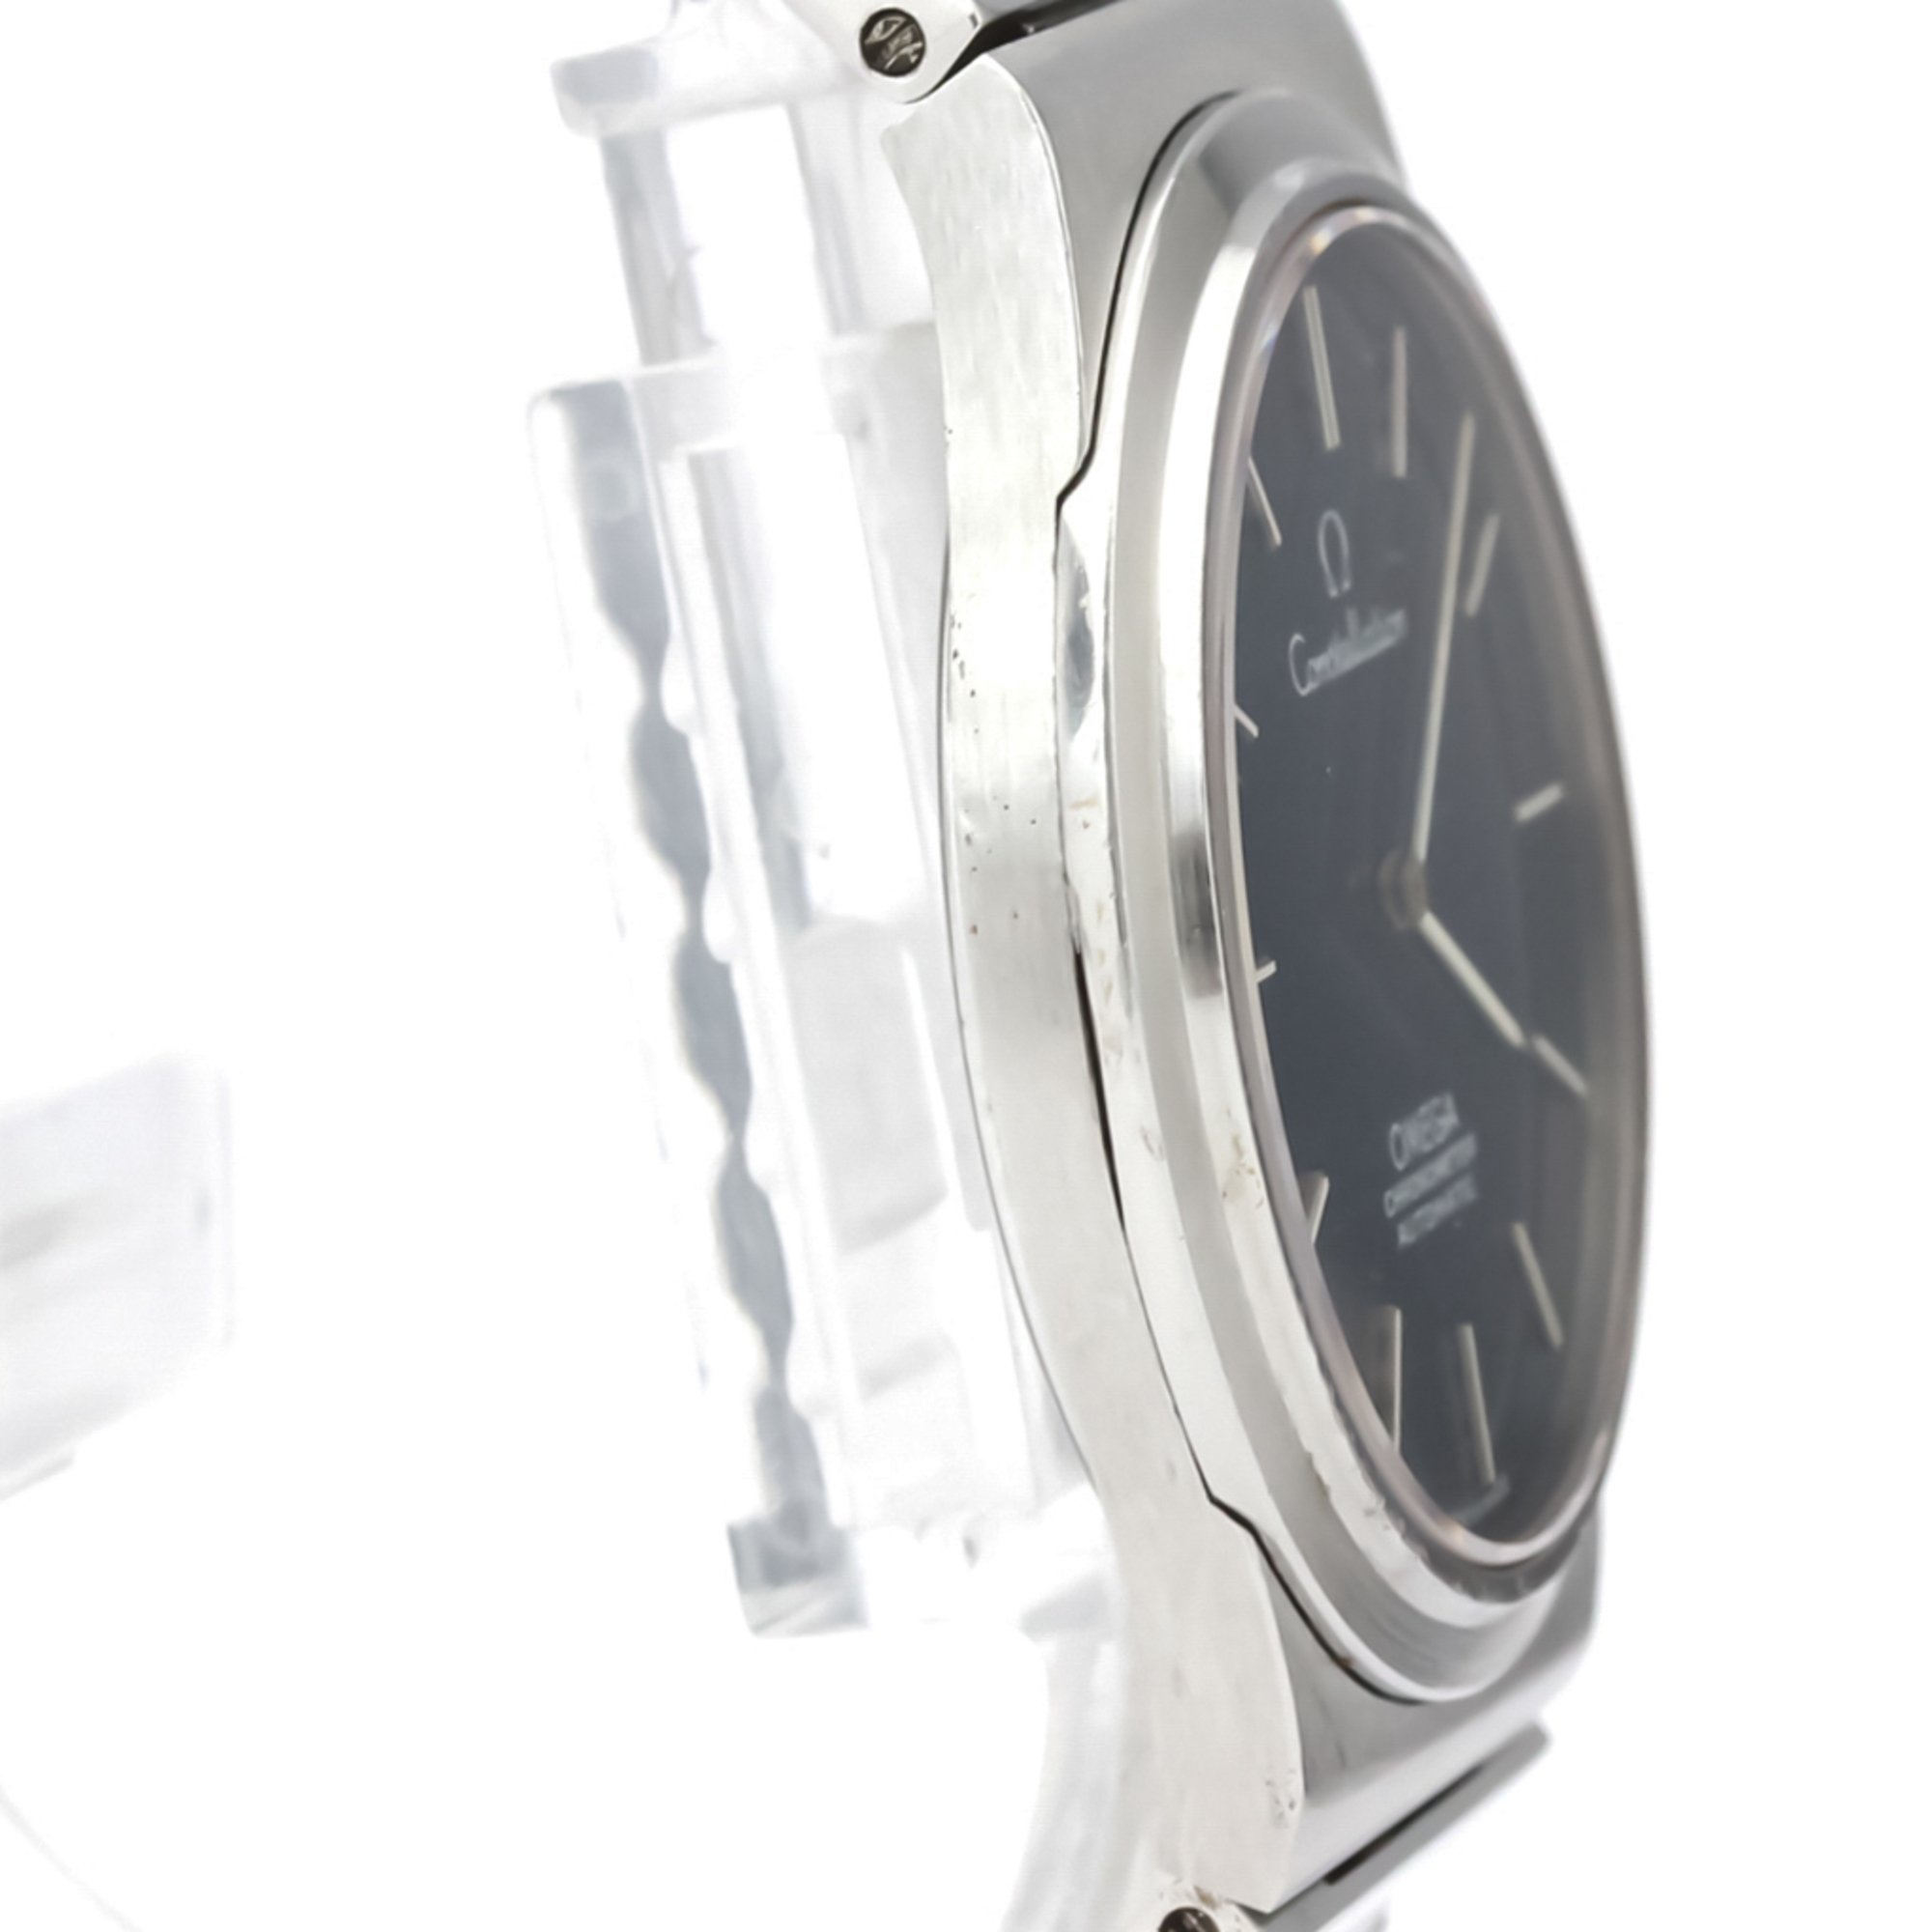 Omega Constellation Automatic Stainless Steel Men's Dress Watch 157.0002